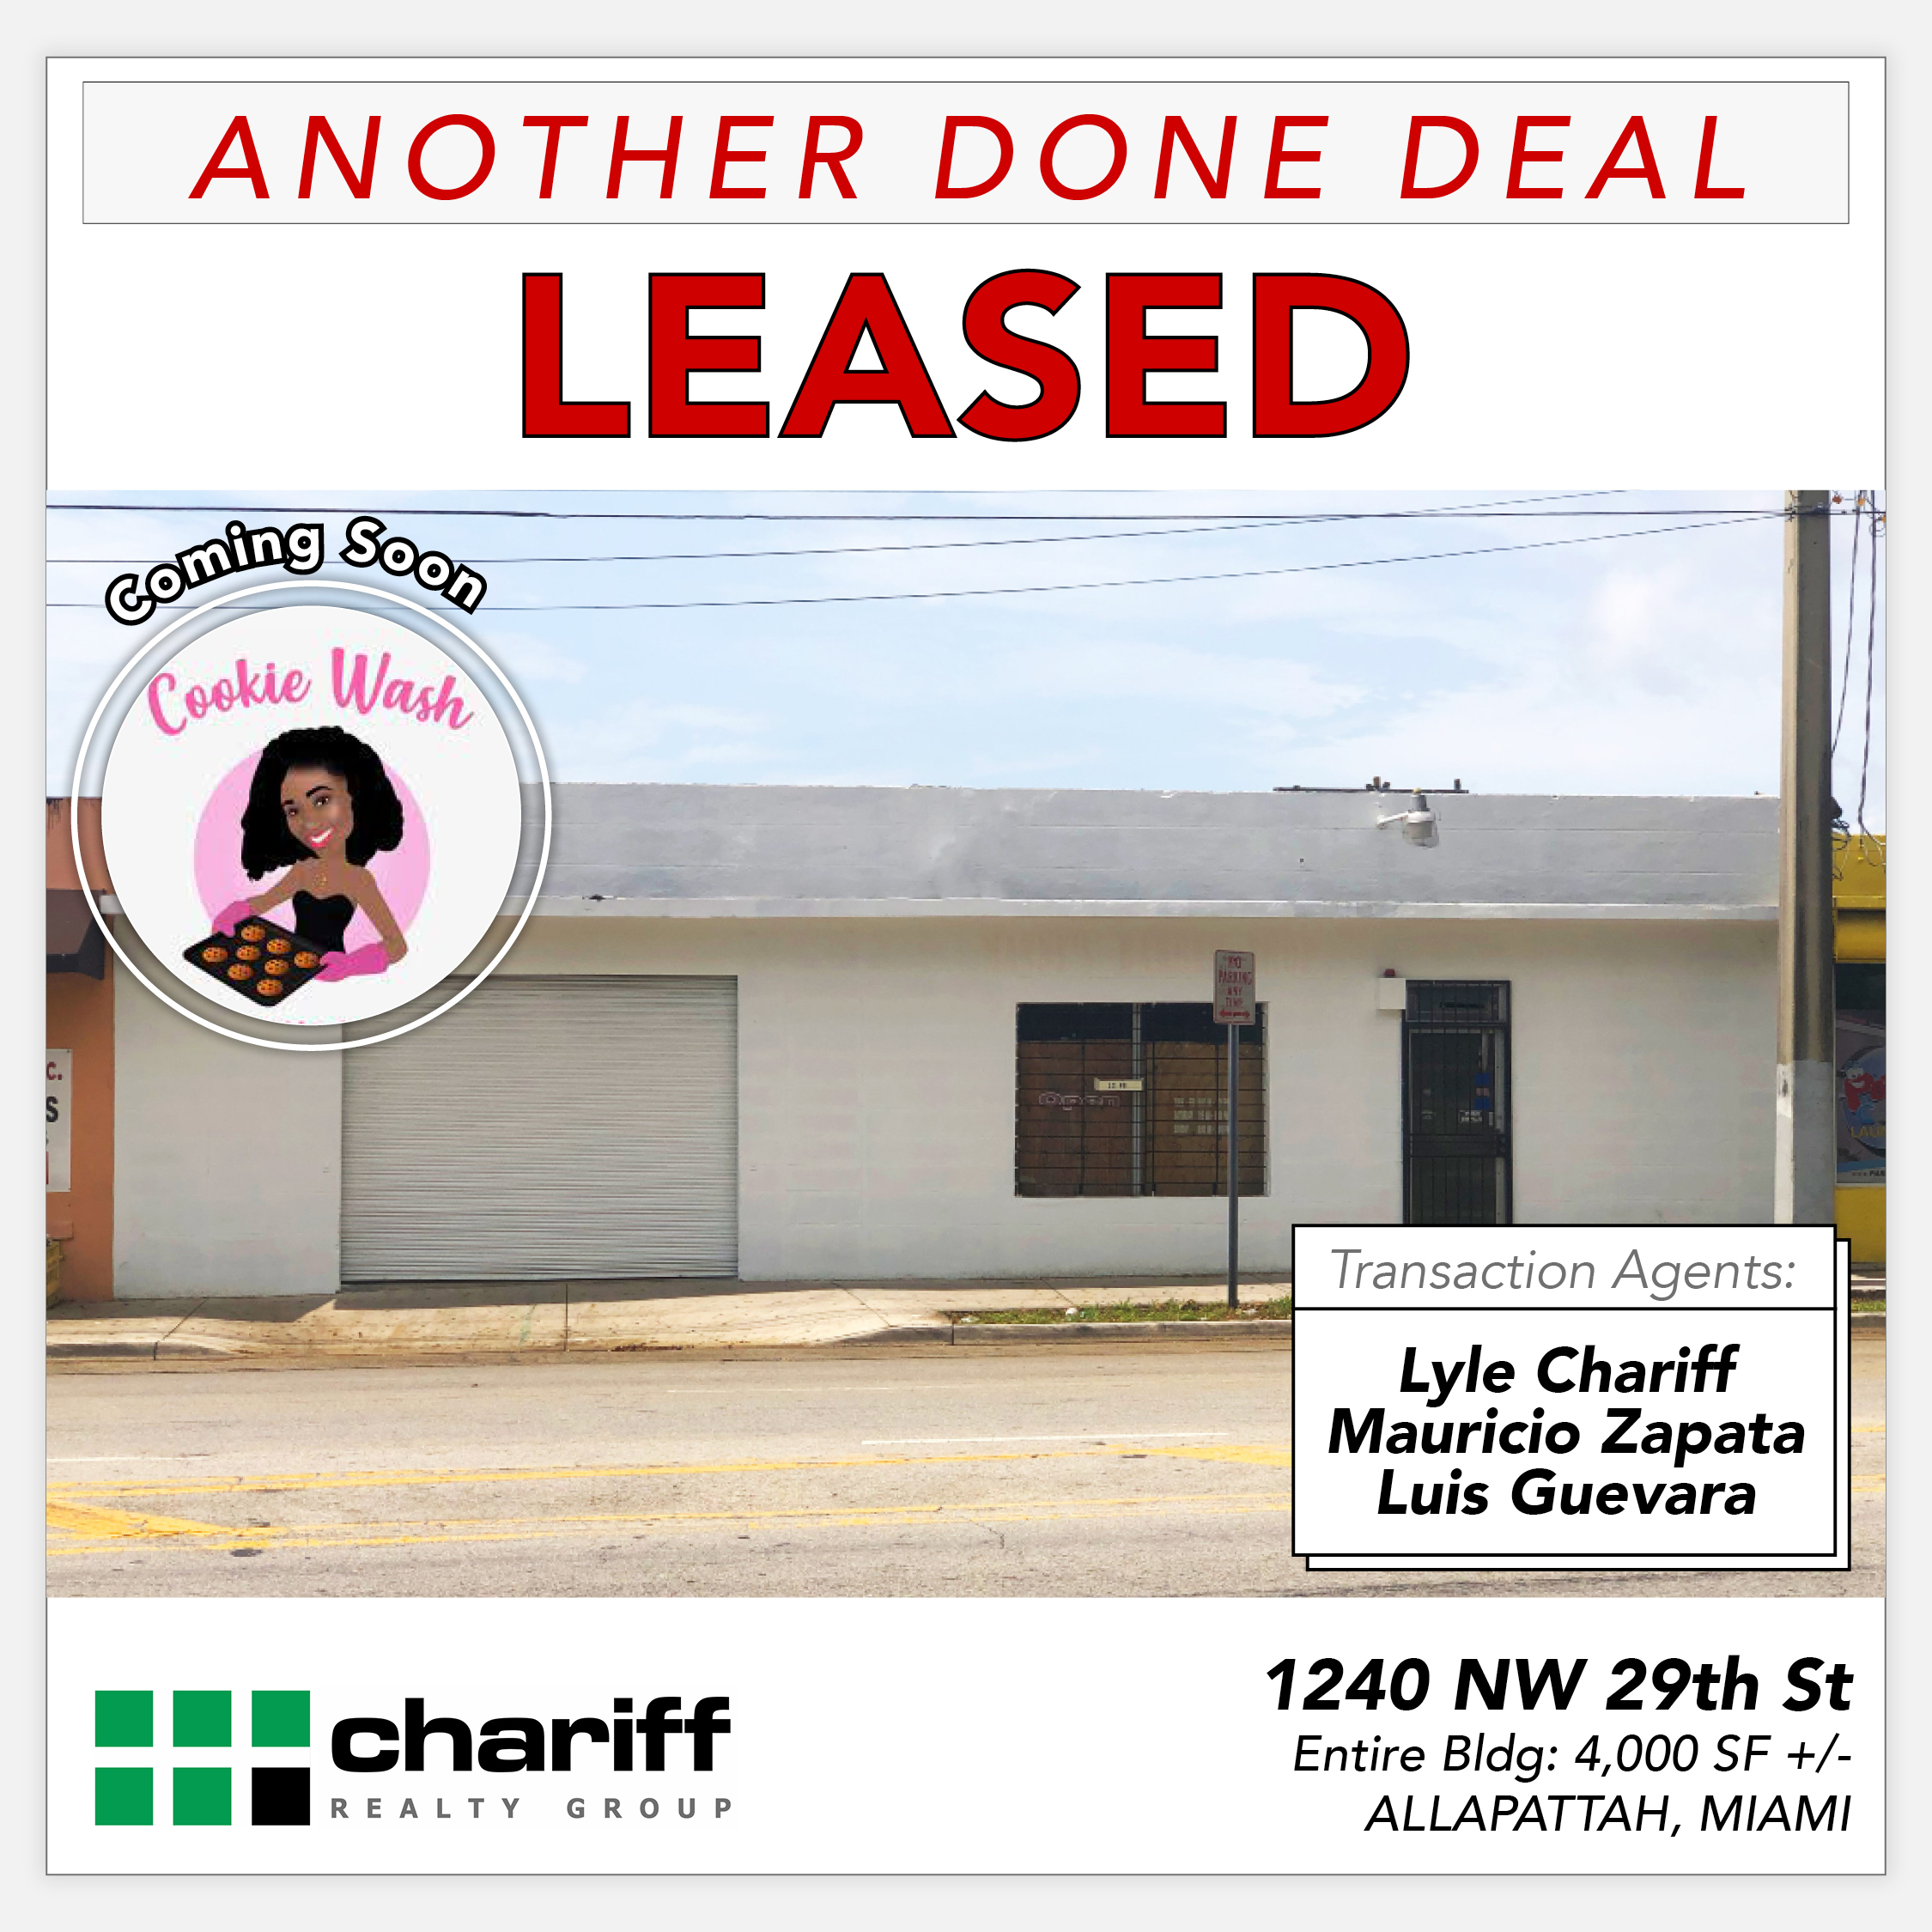 1240 NW 29th St - Another Done Deal- Leased- Allapattah -Miami-Florida-33142-Chariff Realty Group